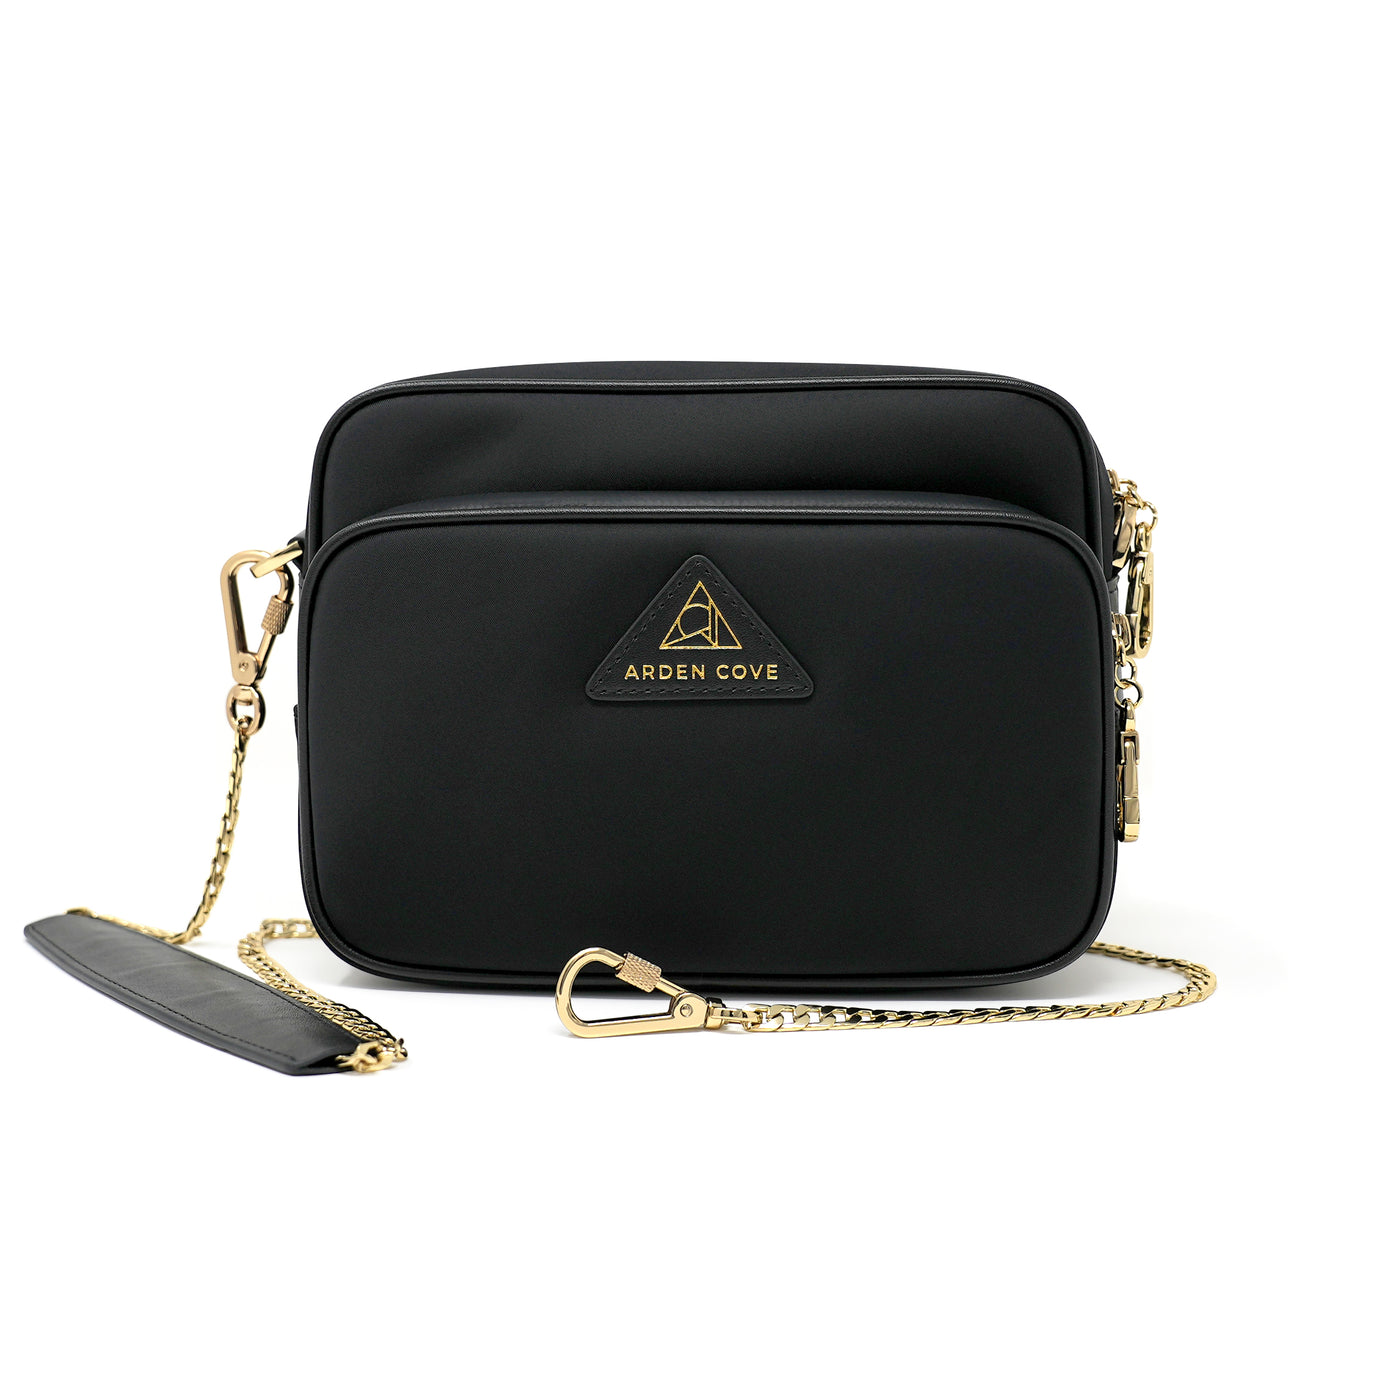 Anti-theft Water-resistant Travel Crossbody - Crissy Full Crossbody in Black Gold with slash-resistant chain strap & locking clasps straps - front view - Arden Cove